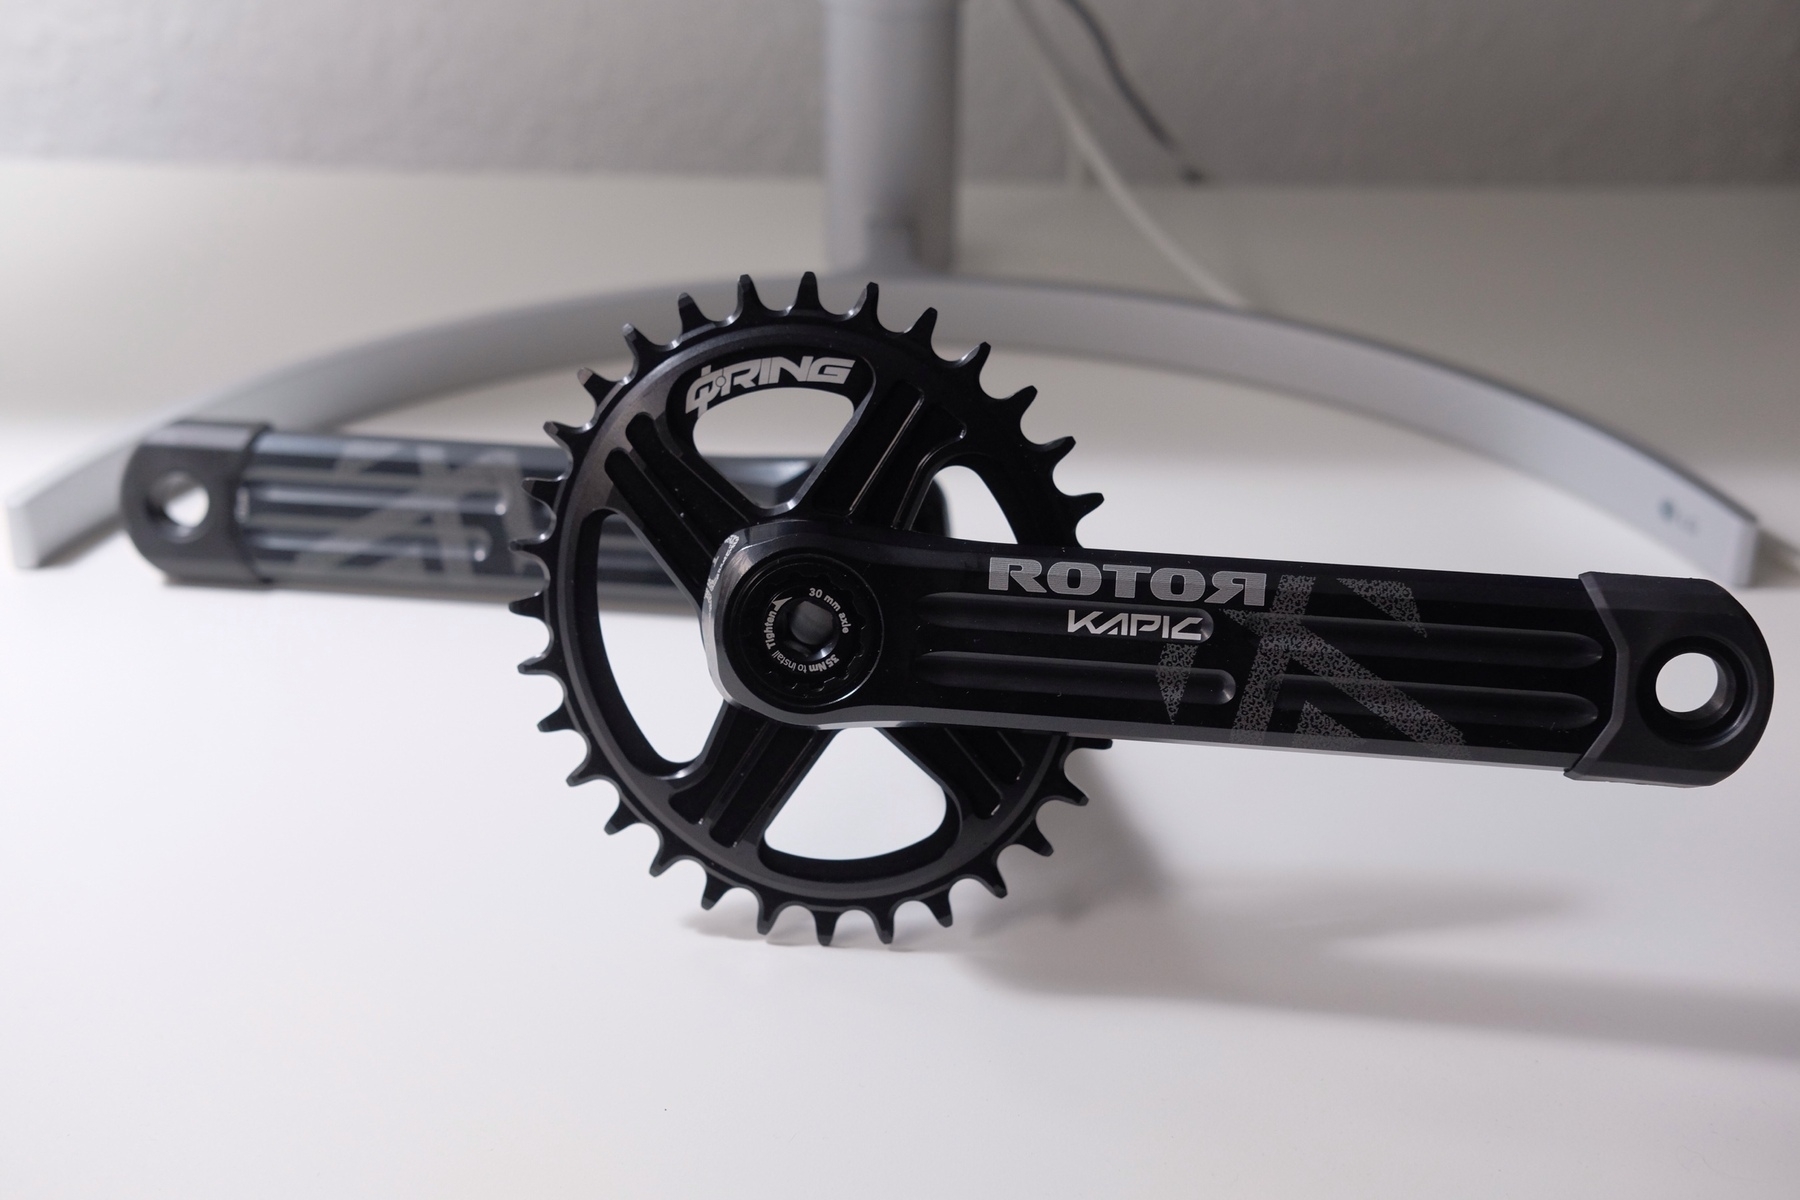 Aluminium single chainring crankset with an oval chainring on a white table in front of the foot of a monitor.